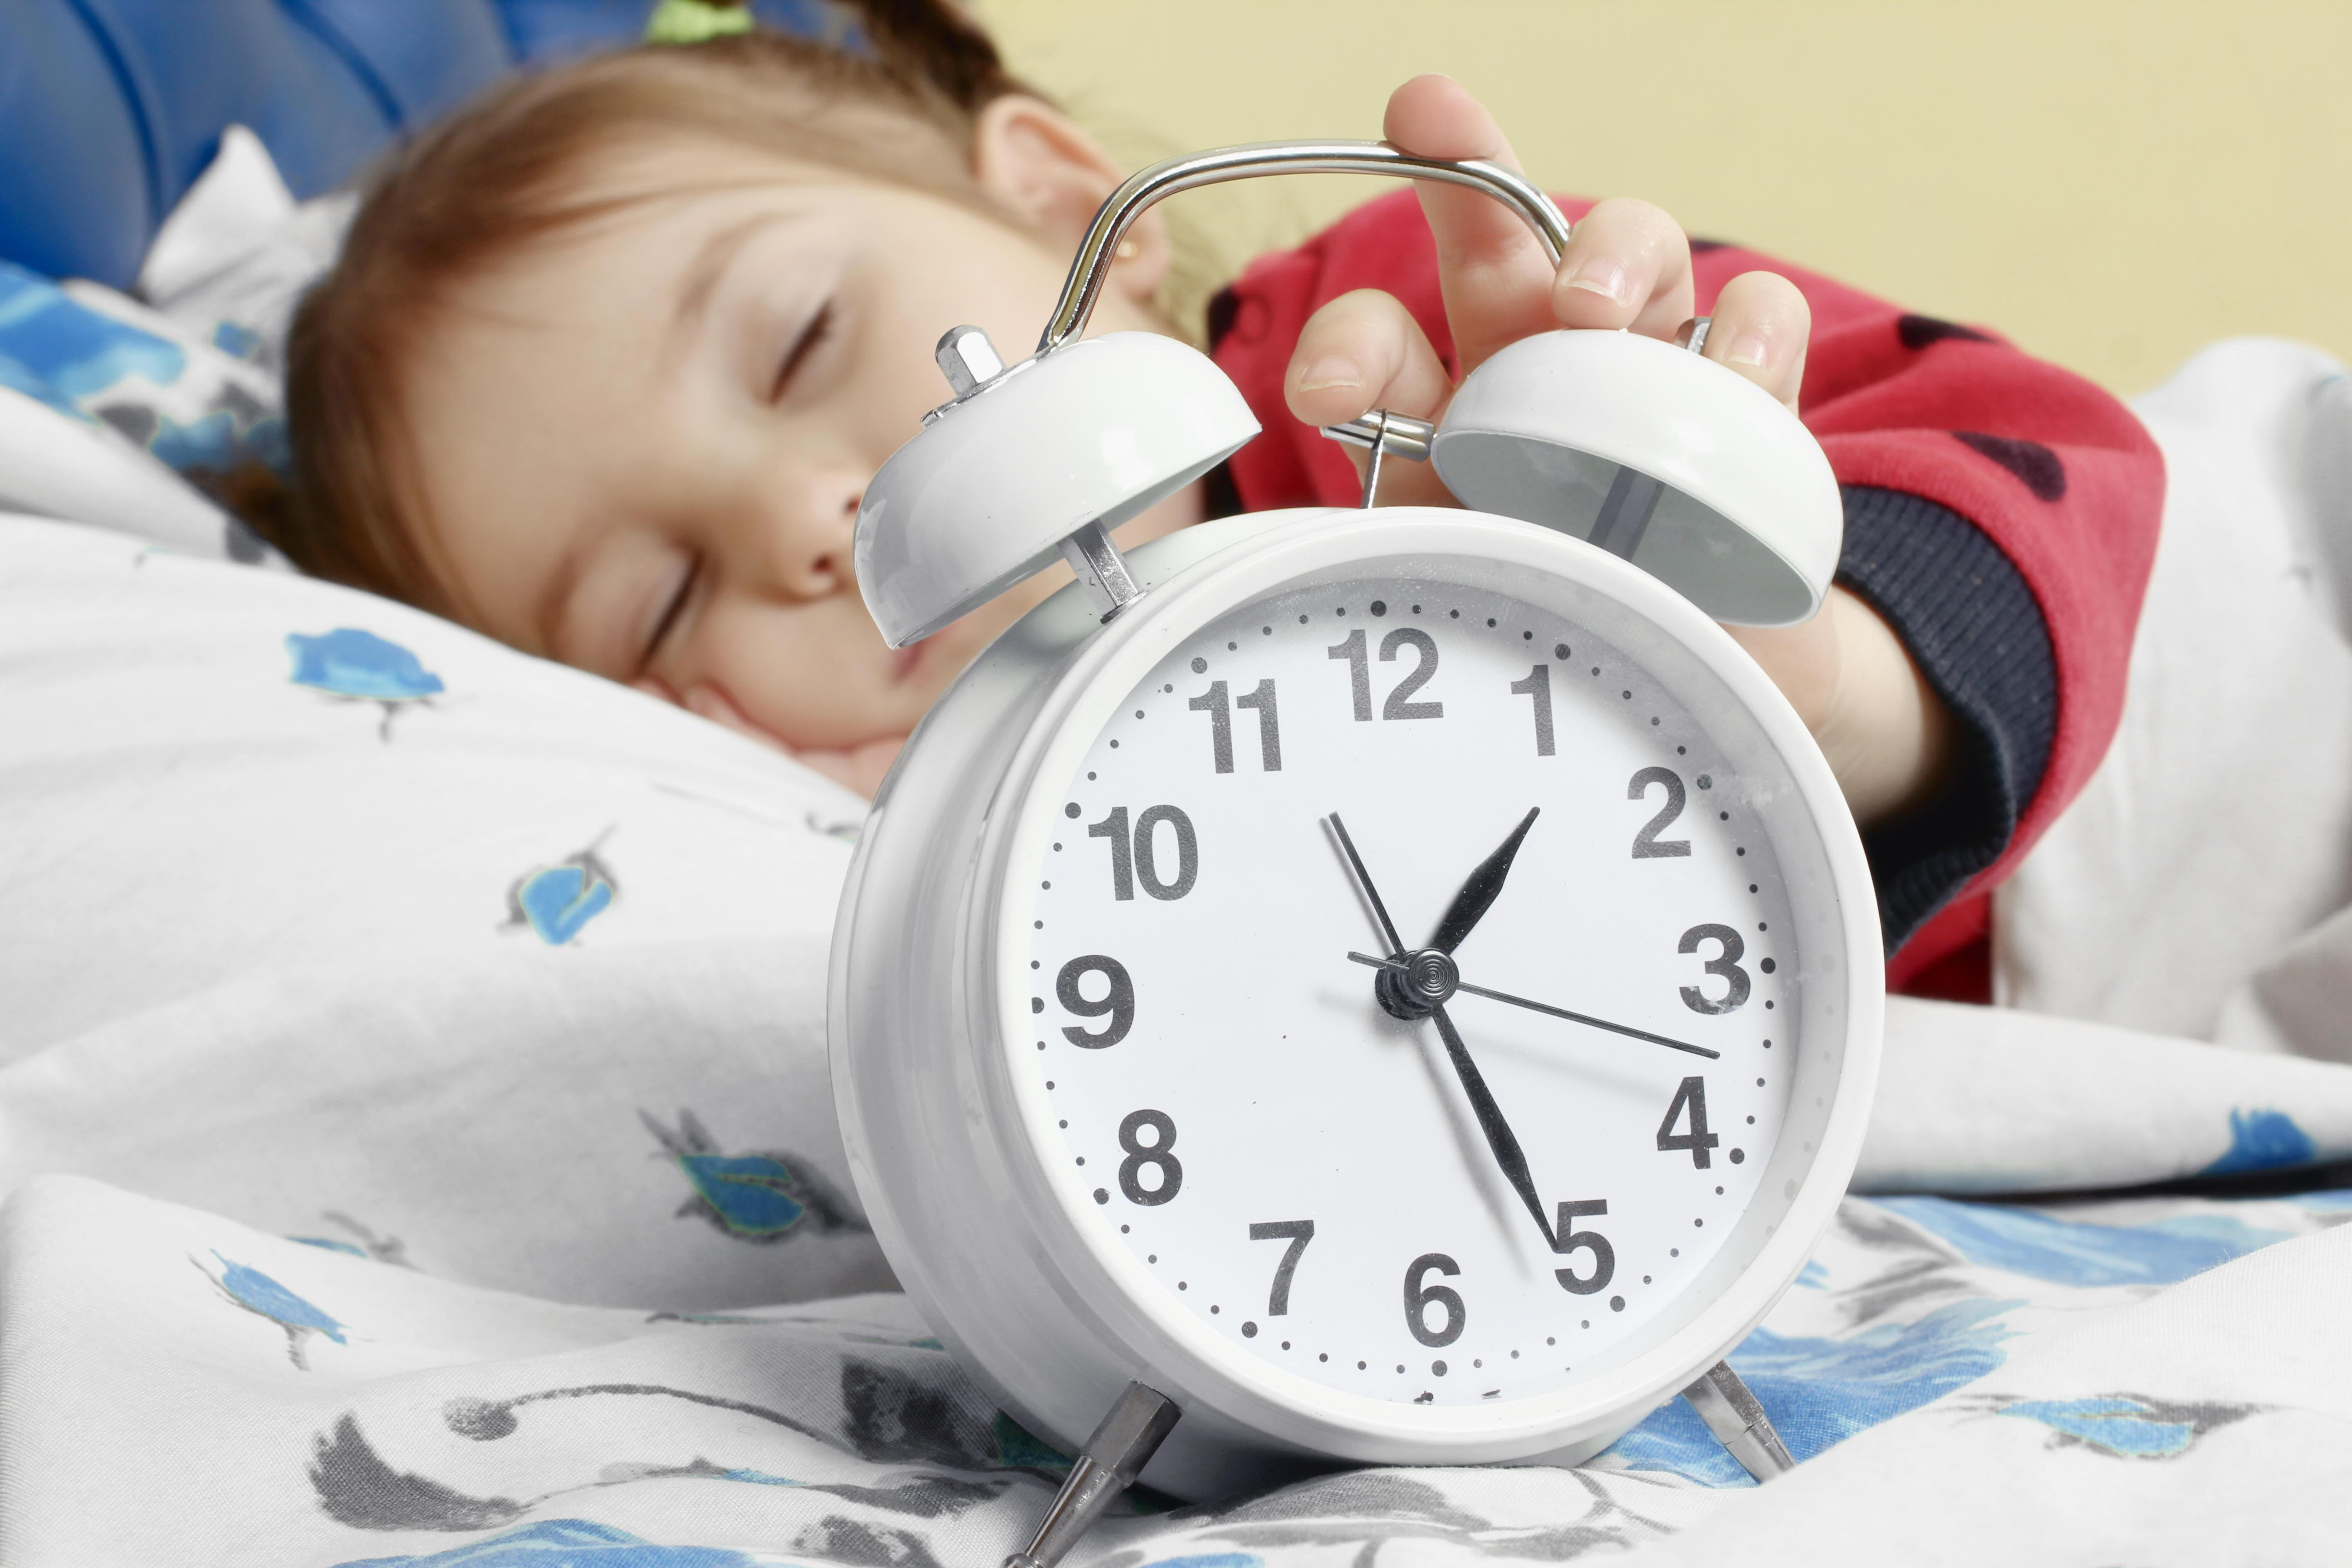  Children as young as five should be in bed by 6.45 pm to 8.15 pm depending on their wake up time